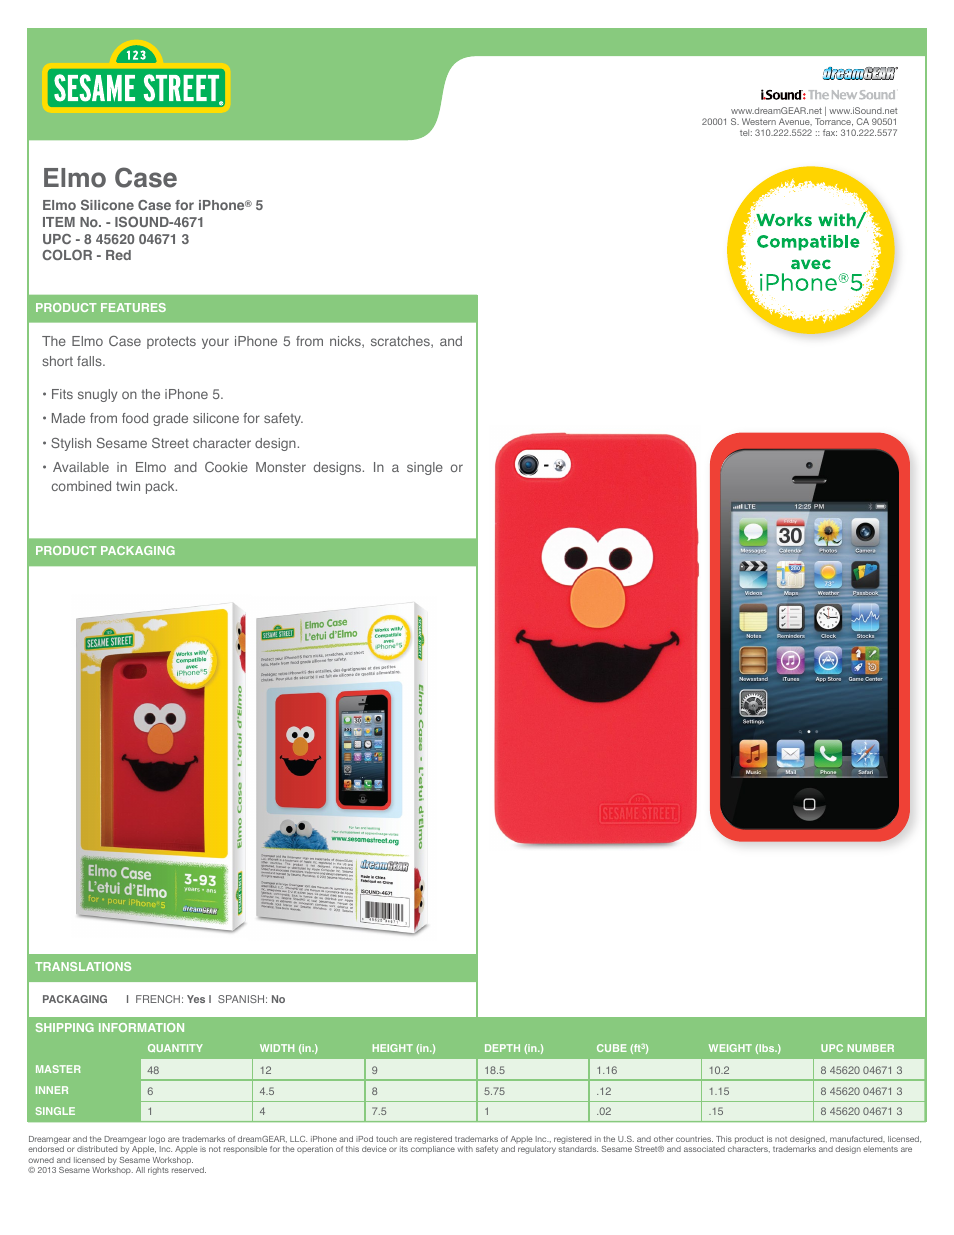 Elmo Case for iPhone5 - Sell Sheet